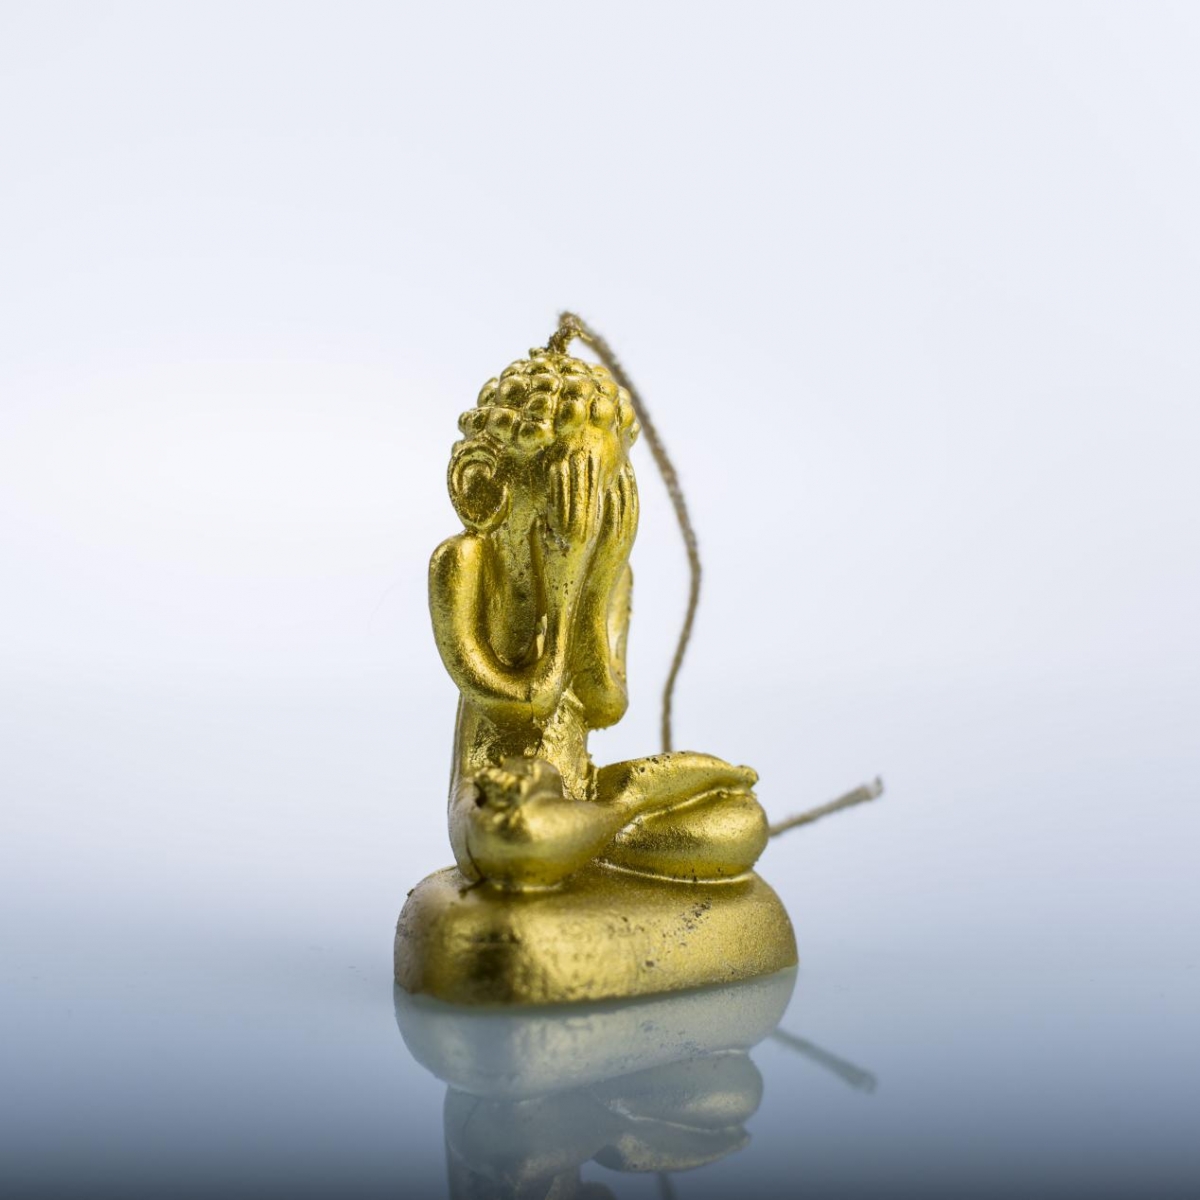 Shaped Candles：Gold Color ,Phra Pidta ,Blindfolded Buddha ,Finely Engraved ,Sculpture Beeswax ,China Factory ,Wholesale Price-HOWCANDLE-Candles,Scented Candles,Aromatherapy Candles,Soy Candles,Vegan Candles,Jar Candles,Pillar Candles,Candle Gift Sets,Essential Oils,Reed Diffuser,Candle Holder,